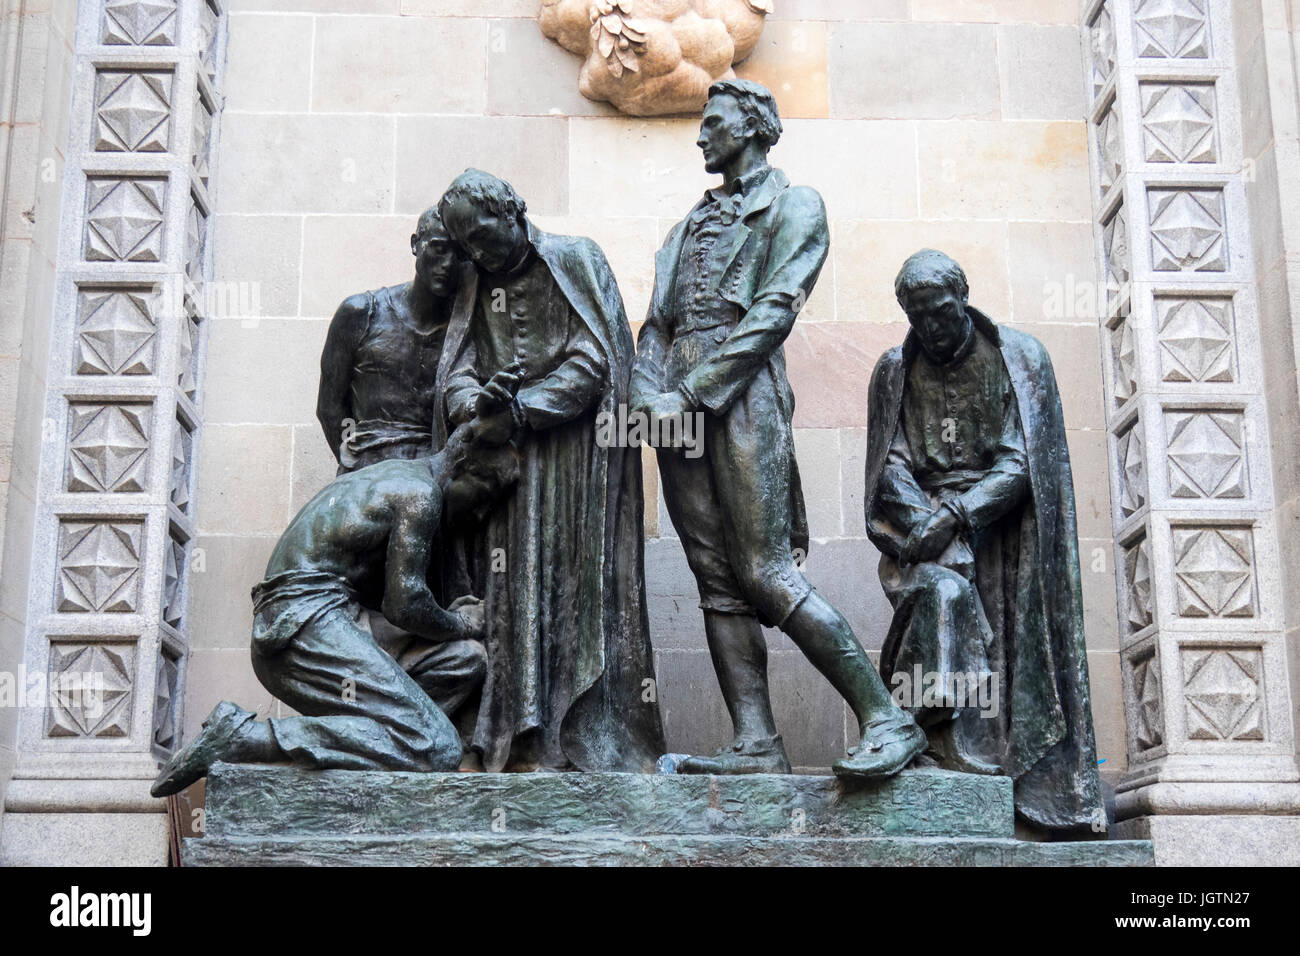 Bronze sculpture 'Monument to the heroes of 1809' on Carrer del Bisbe, Barcelona, Spain. Stock Photo